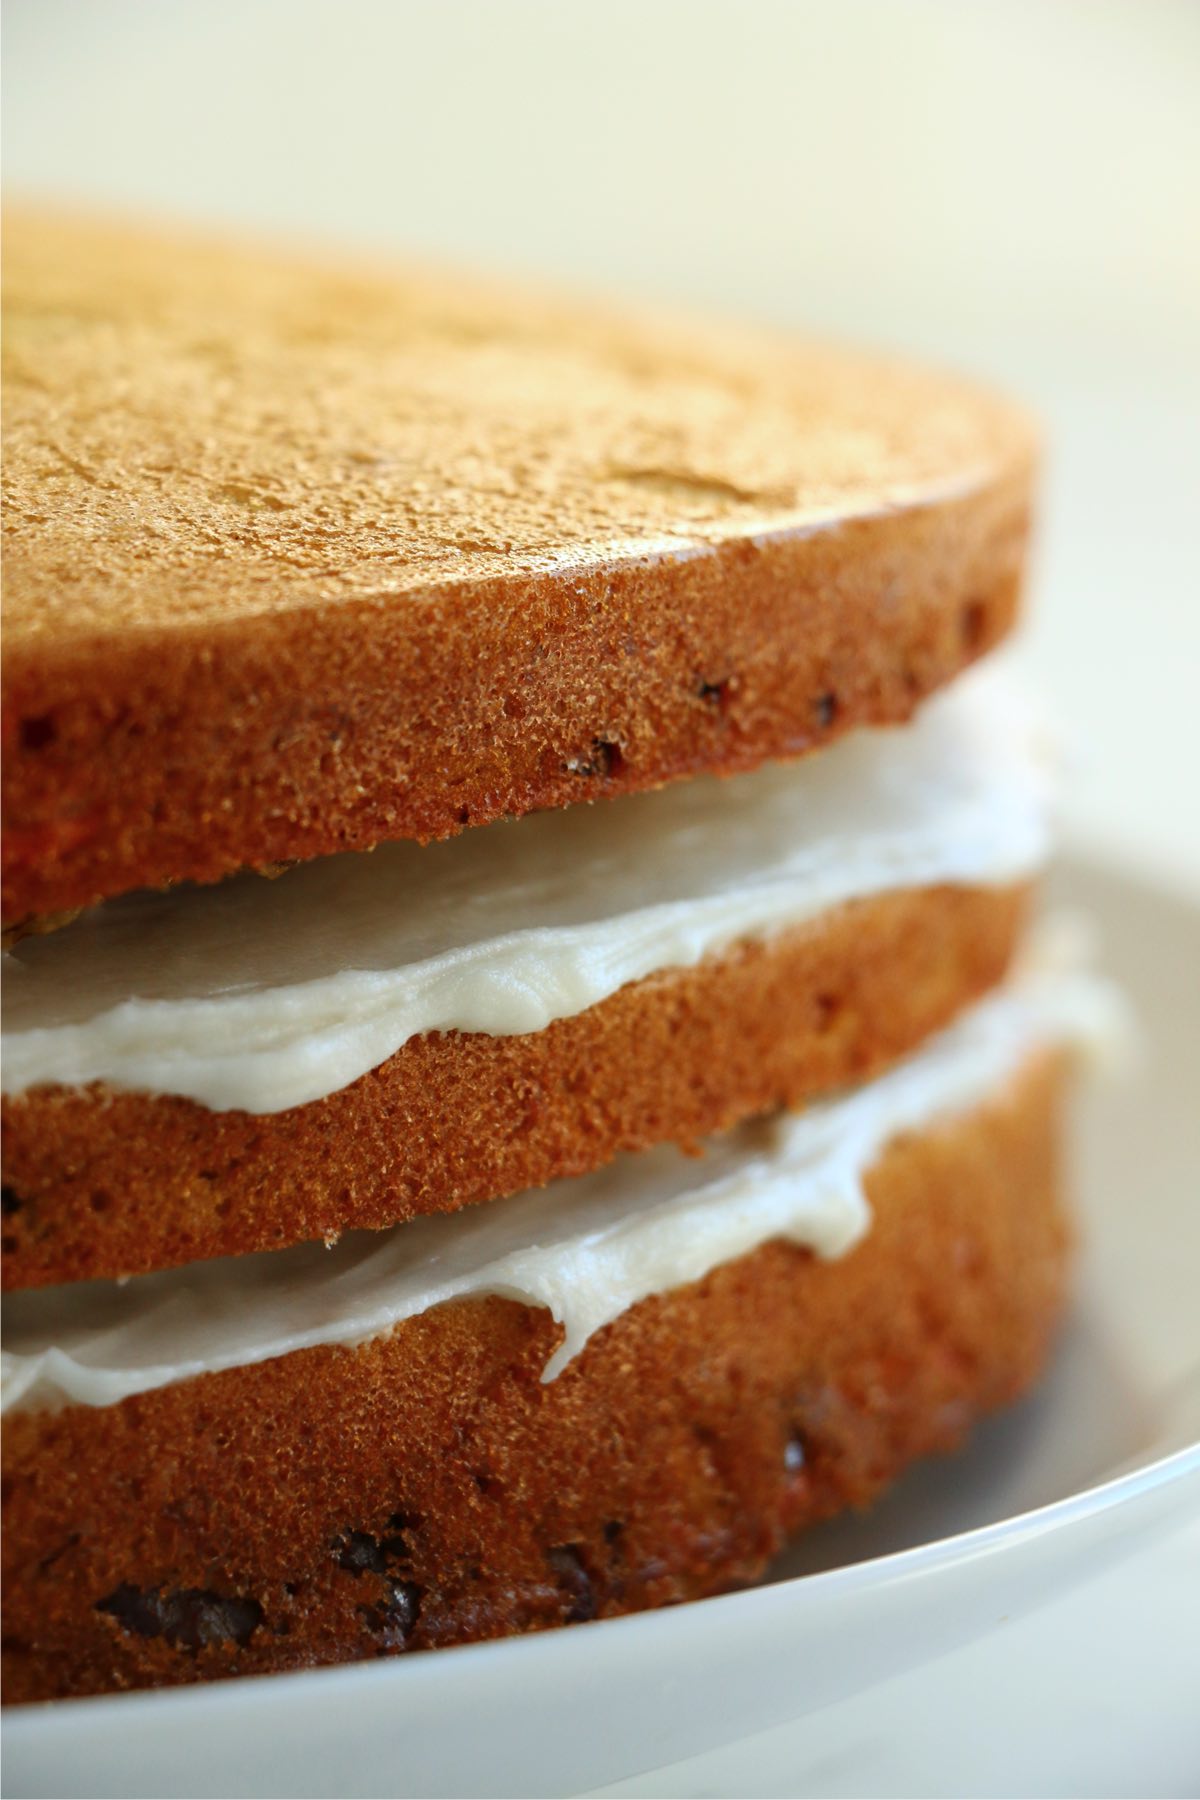 Closeup shot of three layers of naked carrot cake with cream cheese frosting between each layer